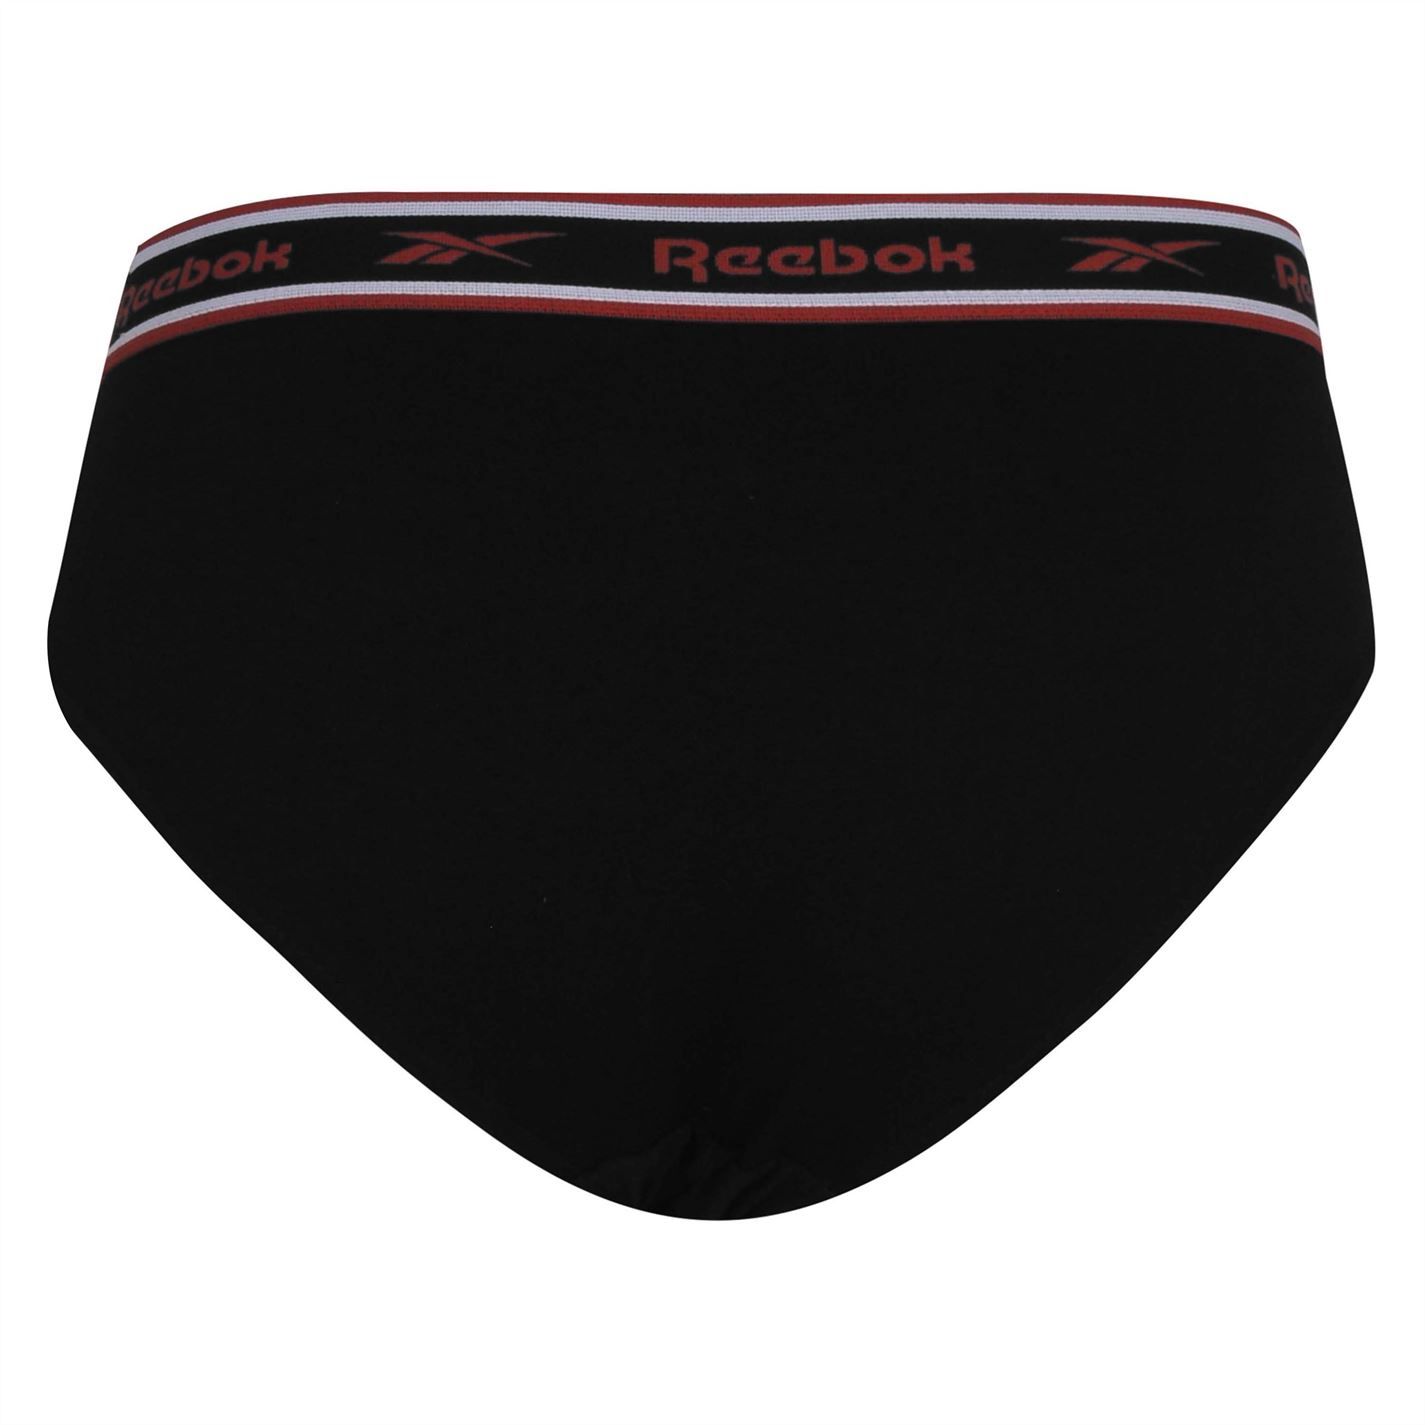 Reebok 3 Pack Cotton Elastane Briefs Men's These briefs from Reebok benefit from being crafted with a cotton and elastane rich blend which delivers incredible all-day comfort, while the elasticated waistband offers a snug fit and the Reebok branding completes the design. 95% Cotton/5% Elastane, Machine washable.